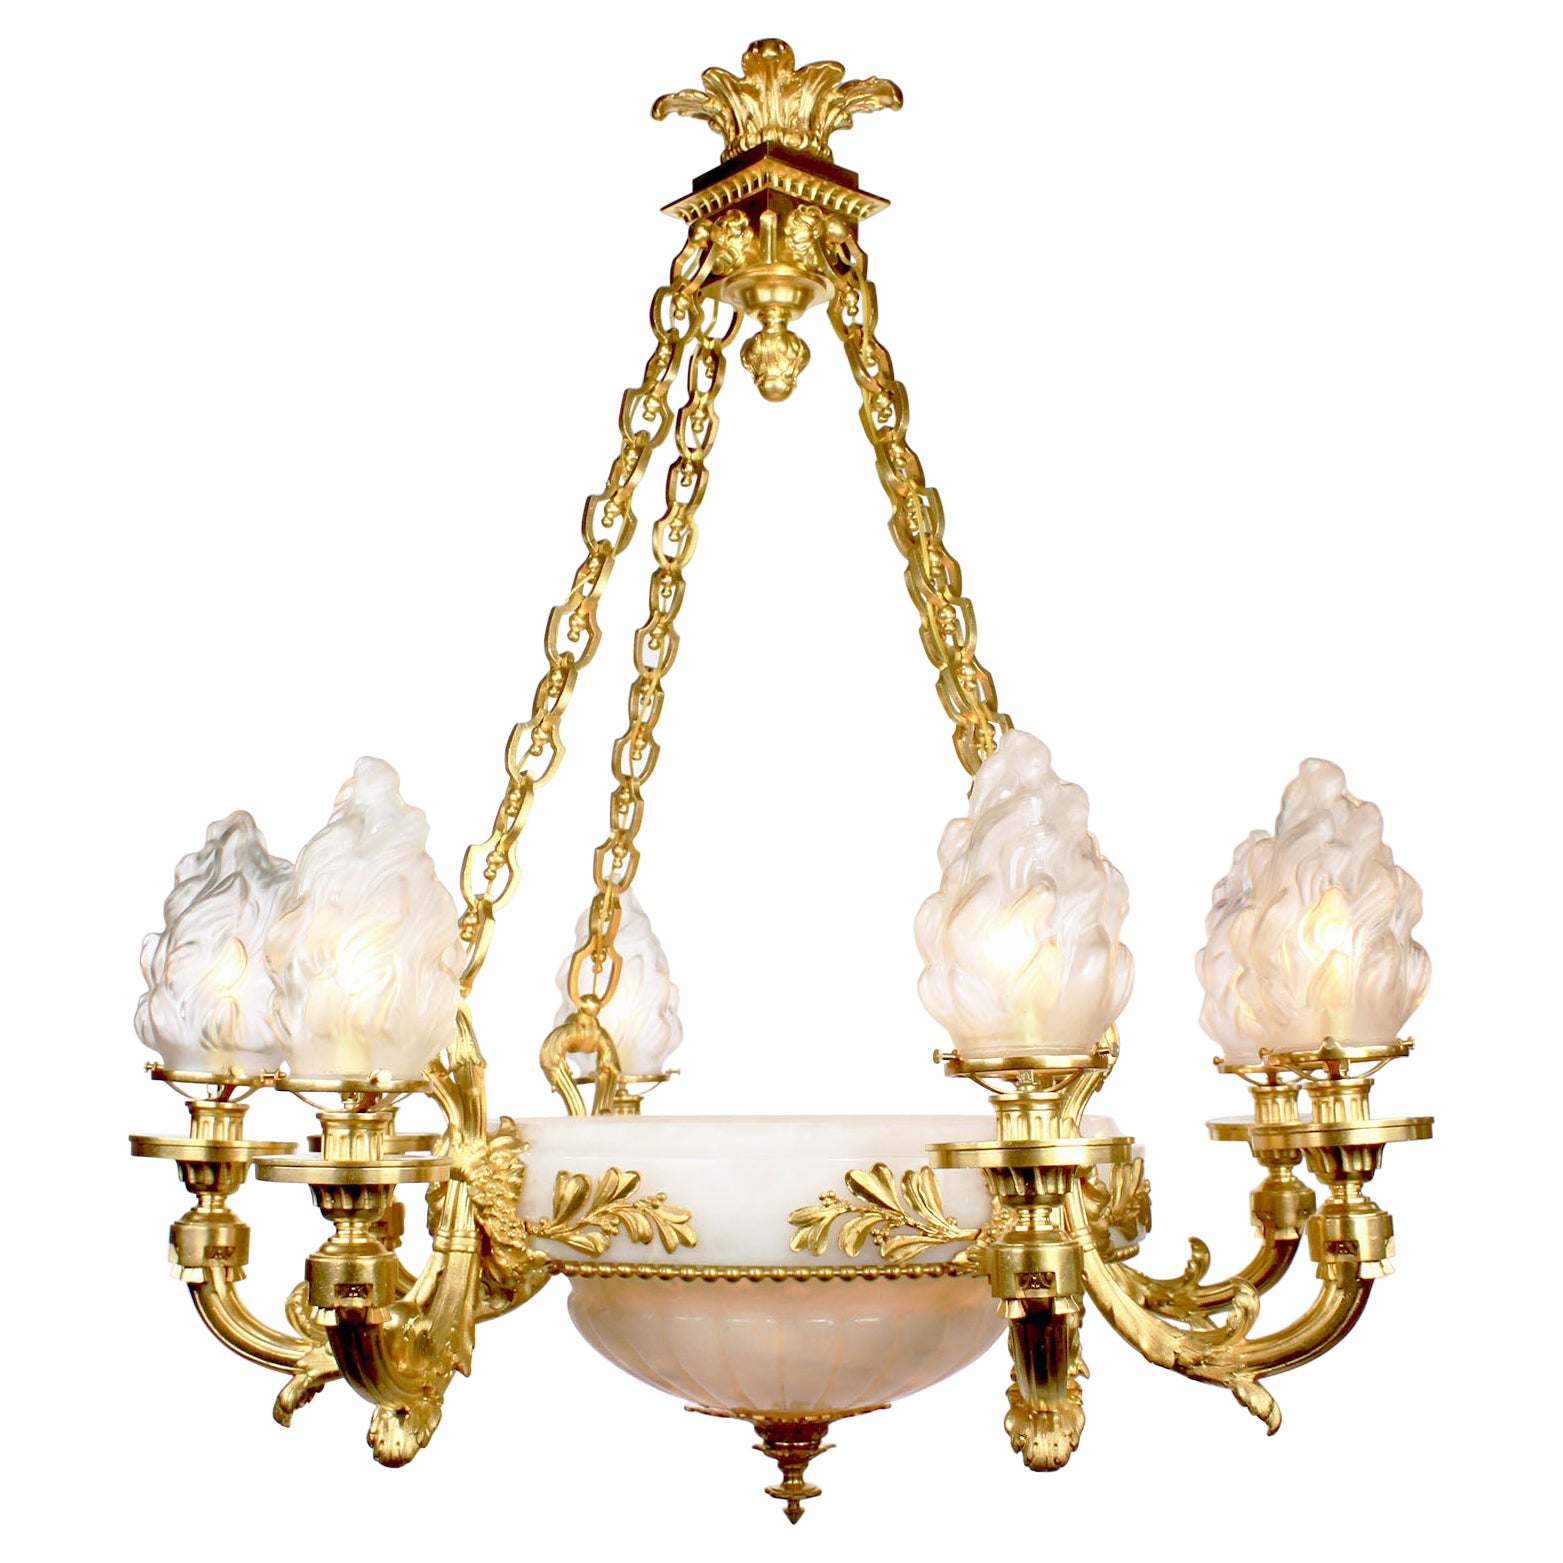 19th Century Franco-Russian Neoclassical Style Ormolu & Alabaster Chandelier For Sale